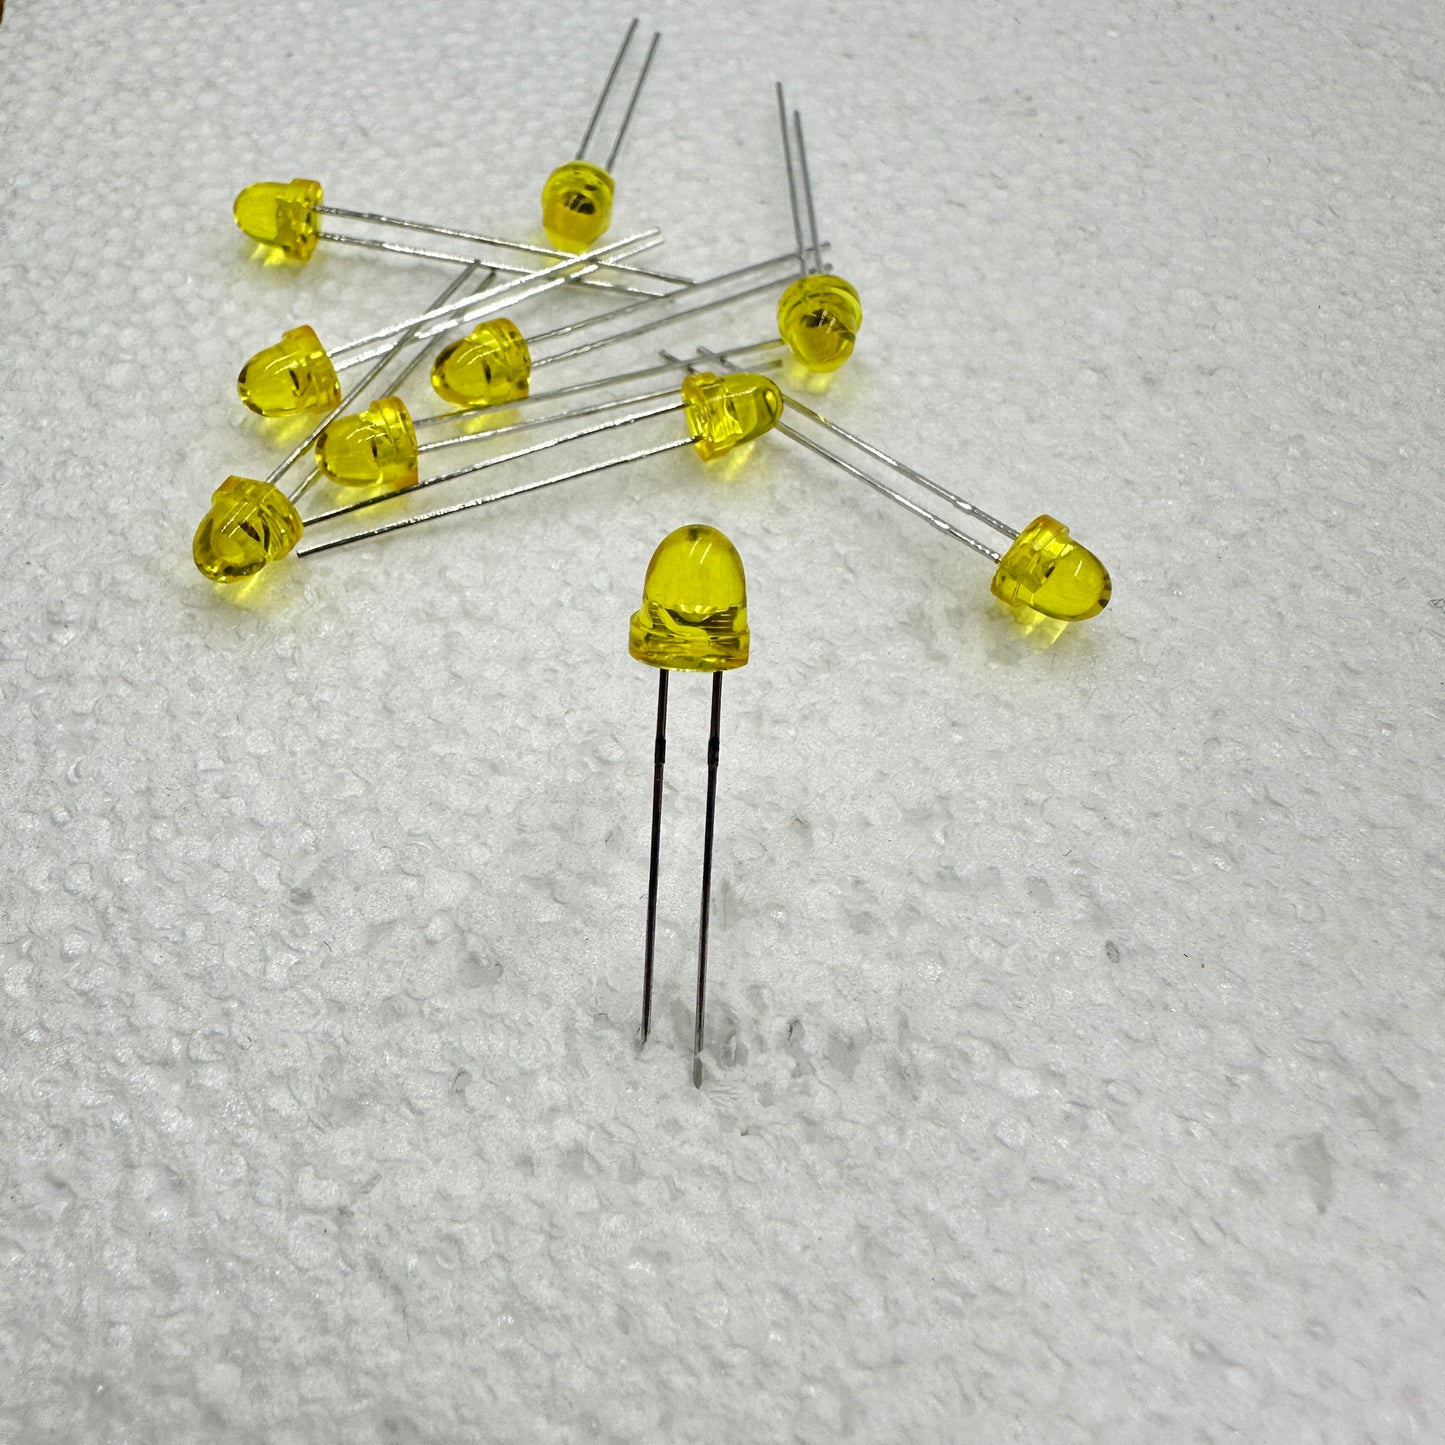 10 PACK Kingbright Yellow 5mm LED's Clipping Diodes